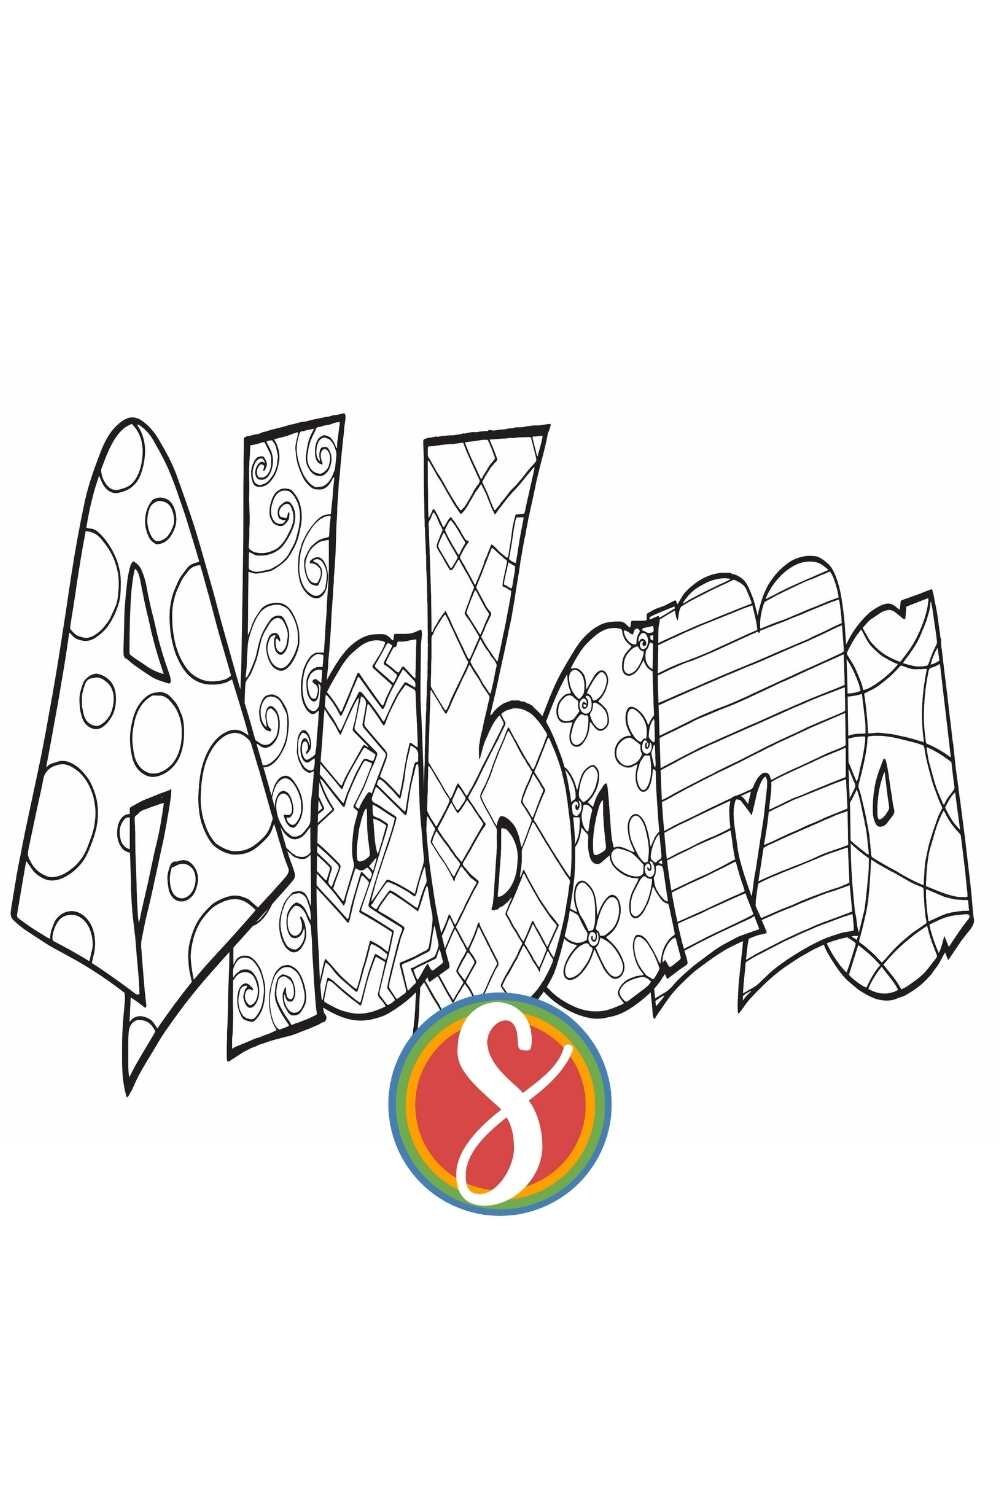 Alabama coloring page, Alabama in bubble letters with doodles inside to color